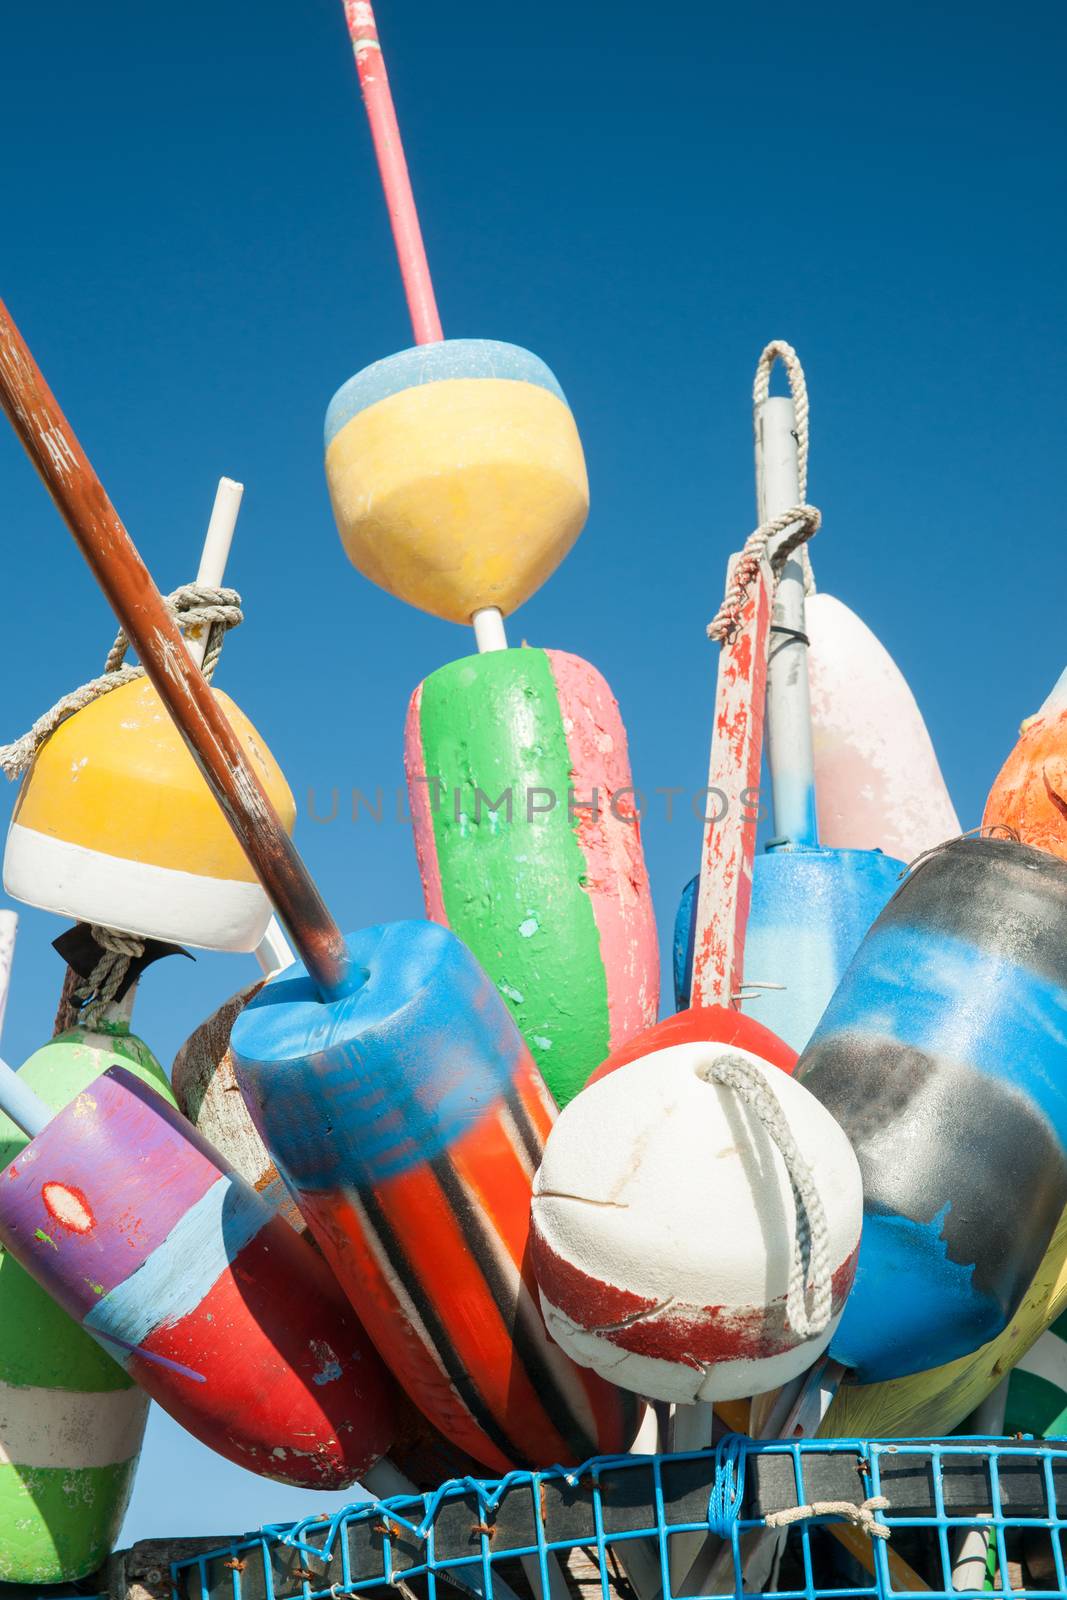 Collection of colorful fishing or lobster trap buoys and markers at wharf in Provincetown, Massachusetts, USA.